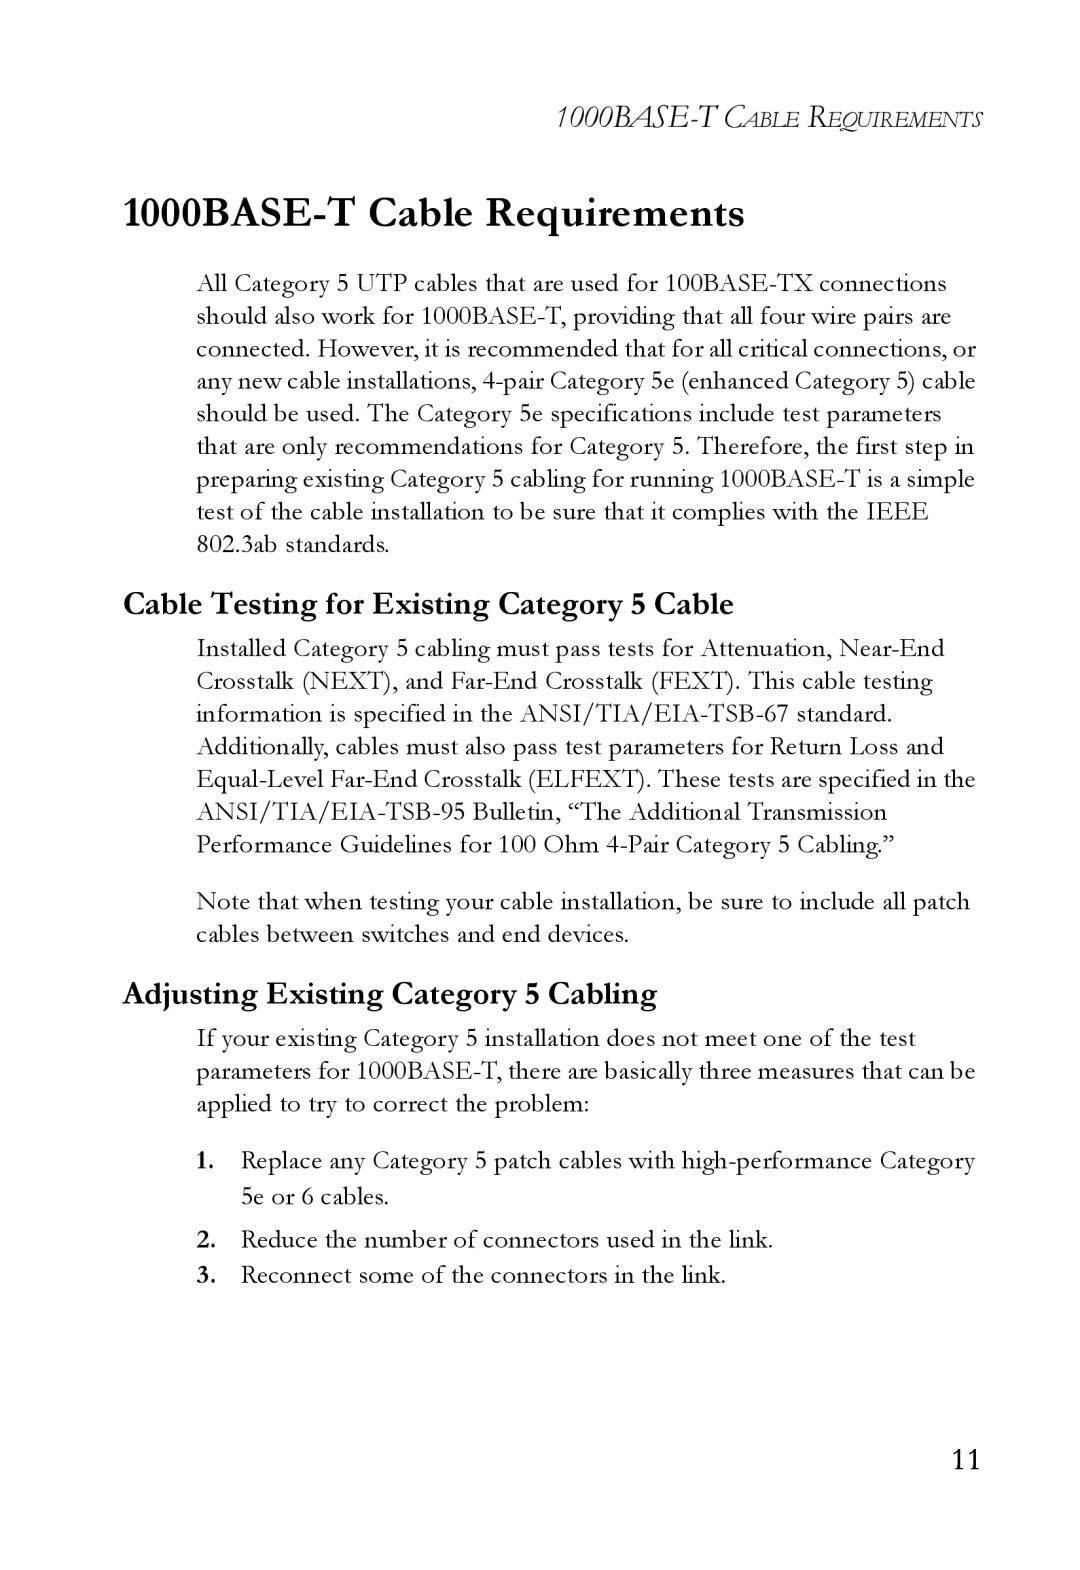 SMC Networks SMCGS24 manual 1000BASE-T Cable Requirements, Cable Testing for Existing Category 5 Cable 